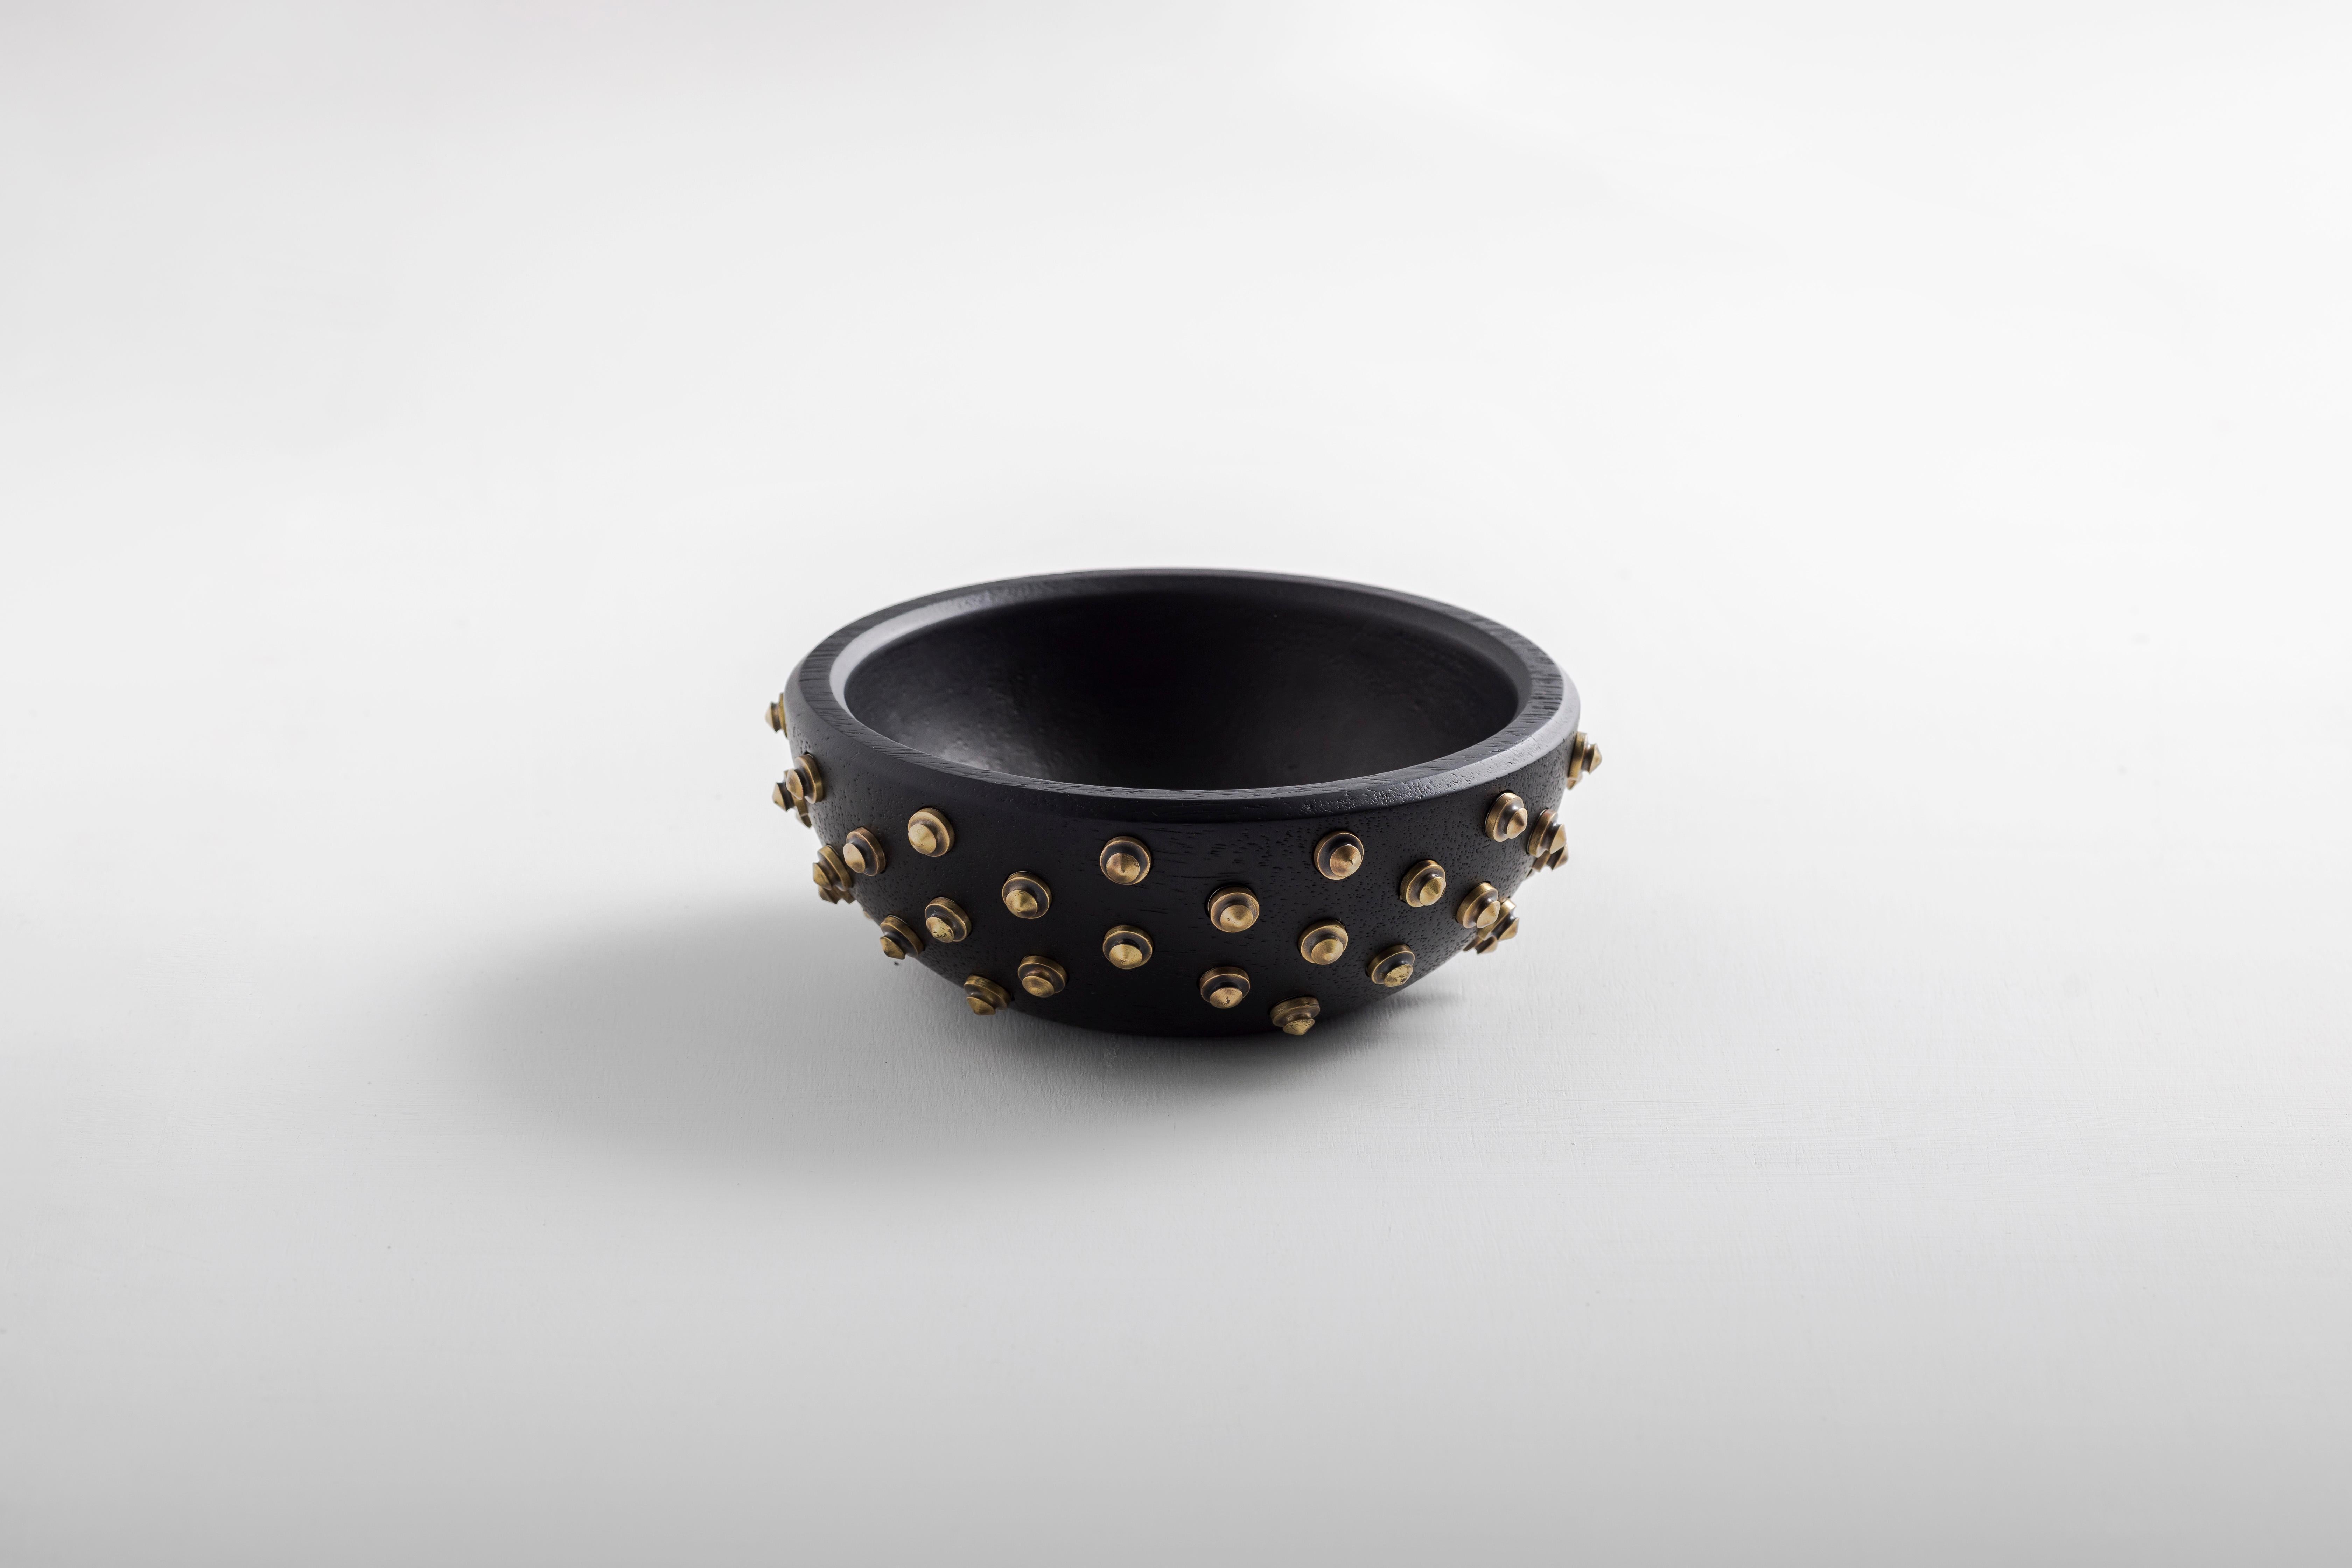 Decorative lathed solid seike wood bowl, with bronze or stainless steel details.

Drawing inspiration from the sacral and baroque motifs of Quito, as well as Ecuador’s highest and dormant volcano, these bowls are meticulously hand-carved from